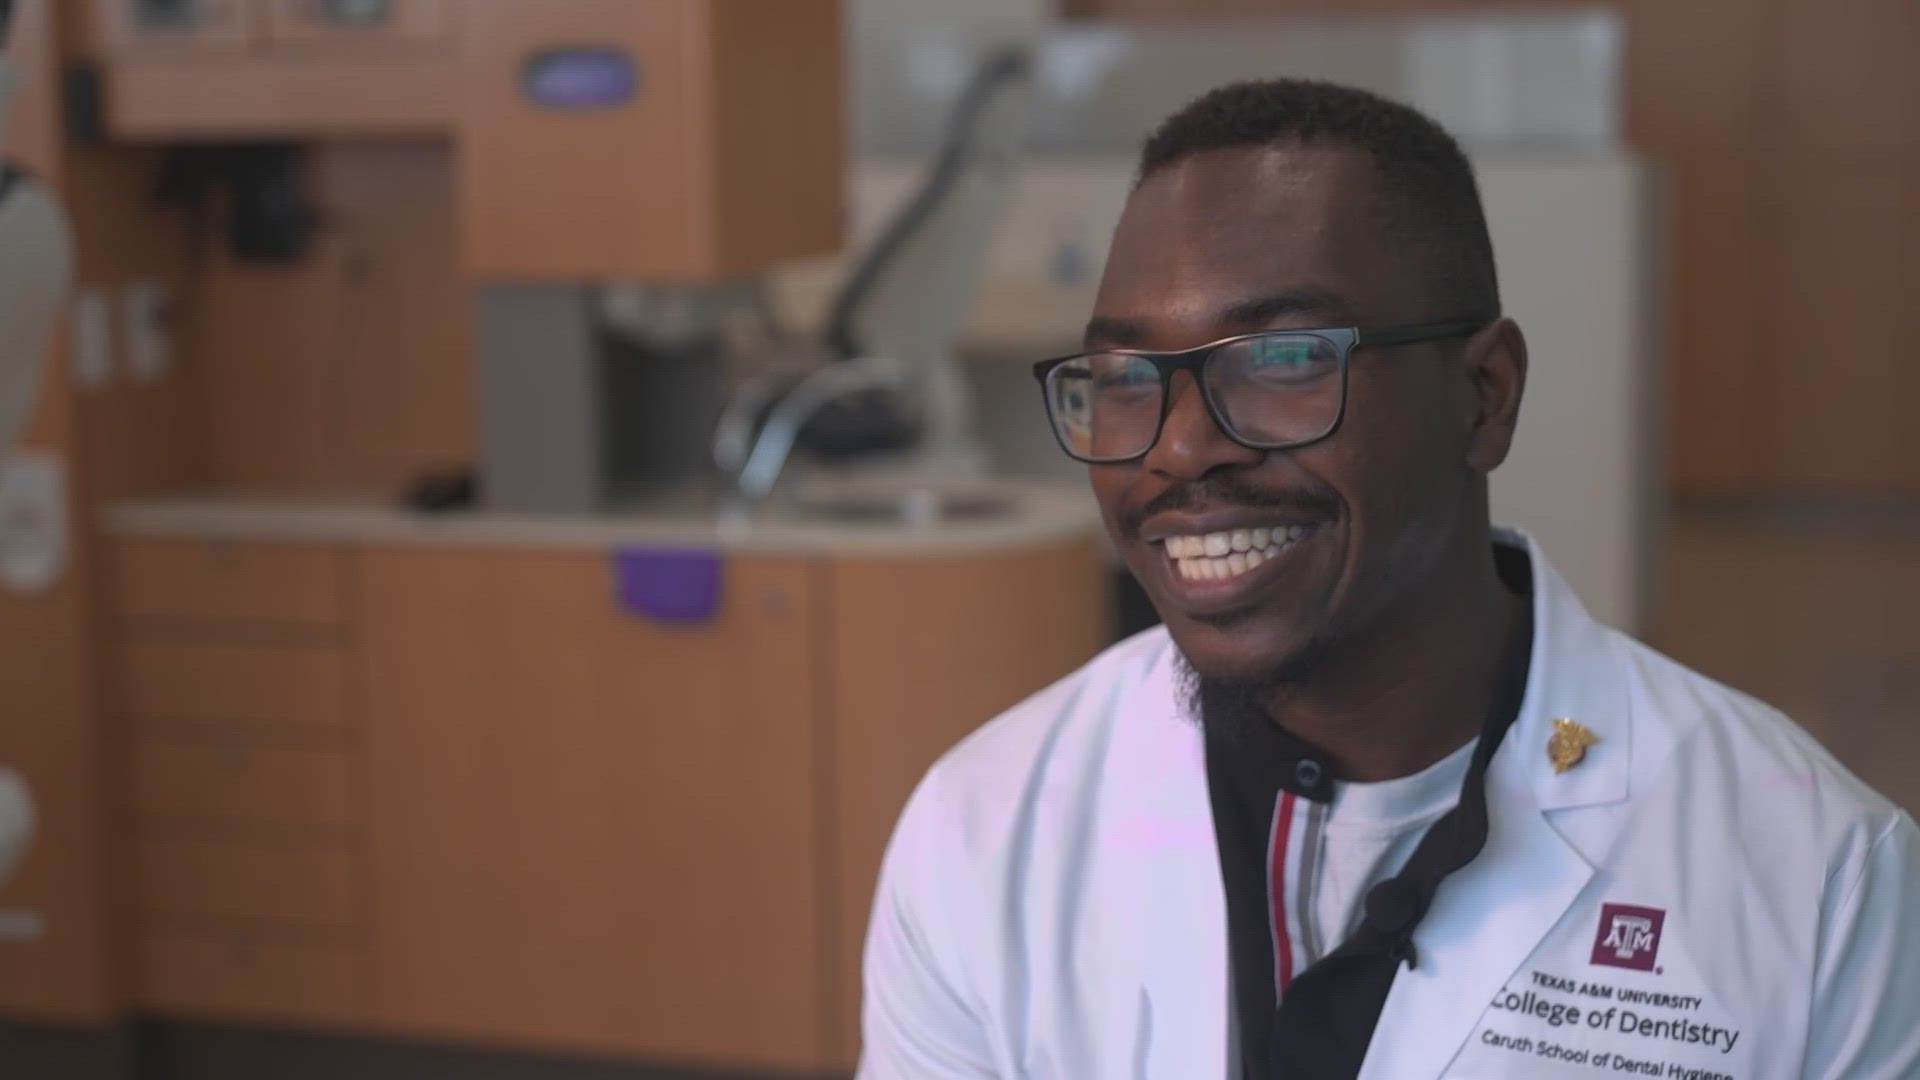 Shim Eliya, who was born in East Africa, is looking to help others as he's admitted into the Texas A&M School of Dentistry.